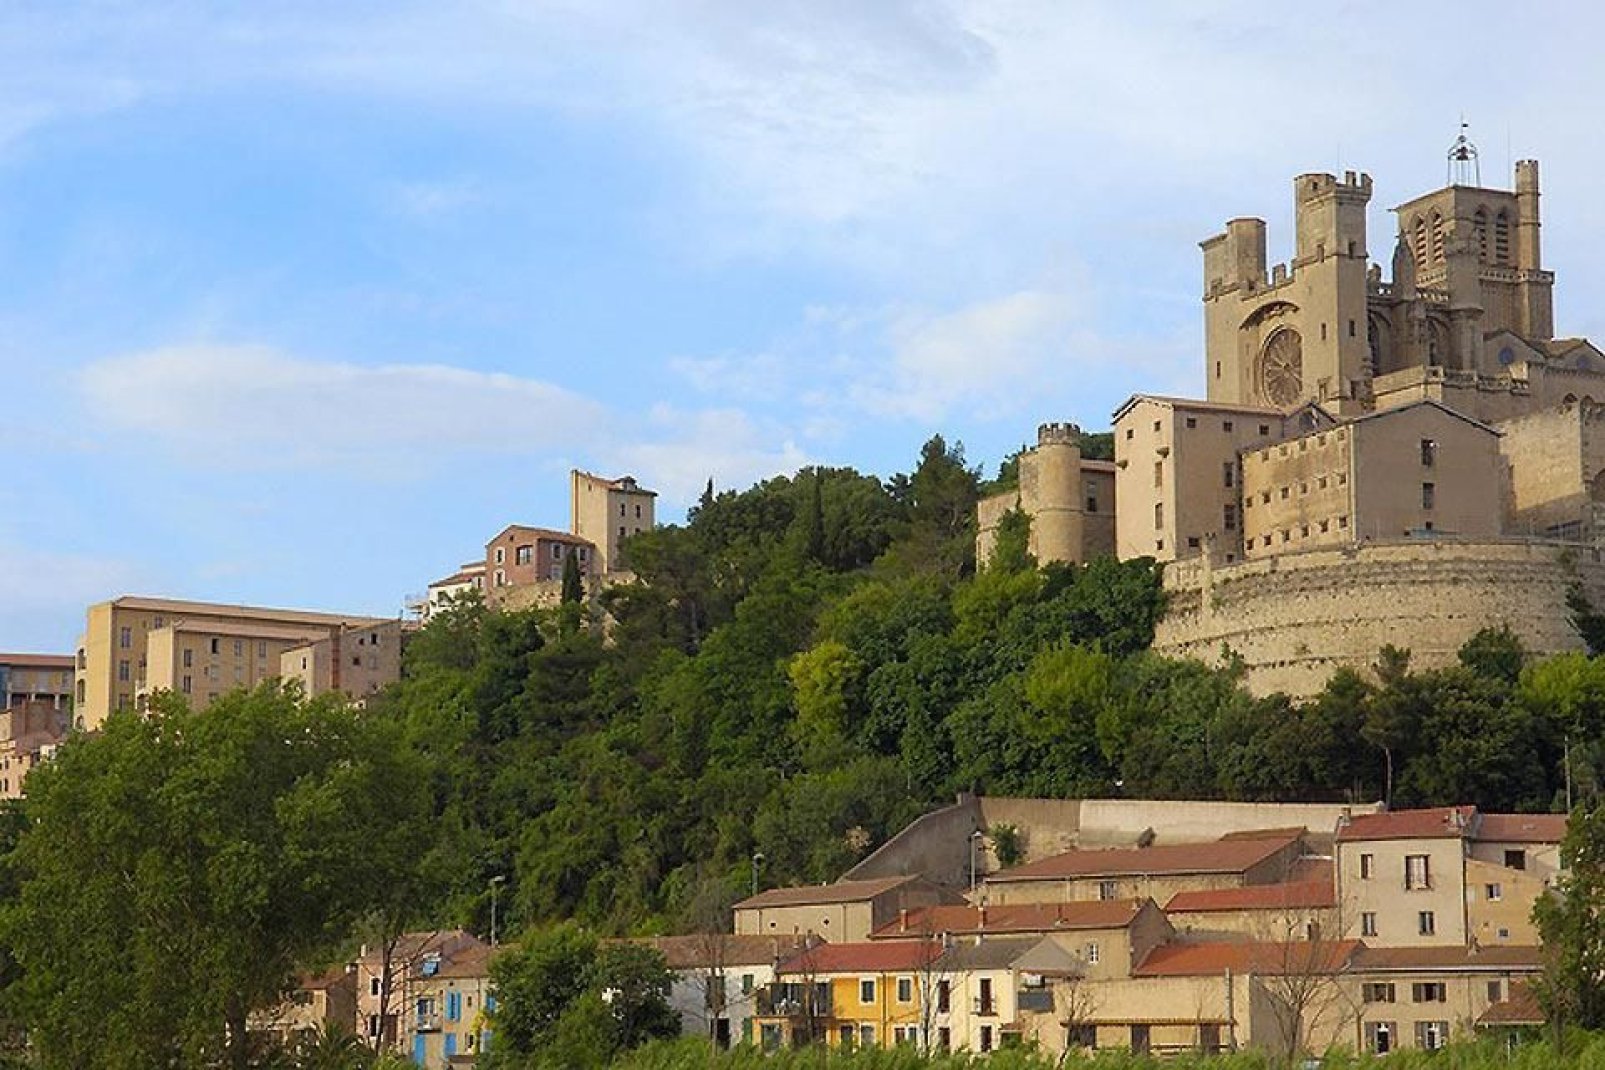 Béziers is the ideal destination for a weekend in the sun and the perfect opportunity to sample the local specialities and regional wines.